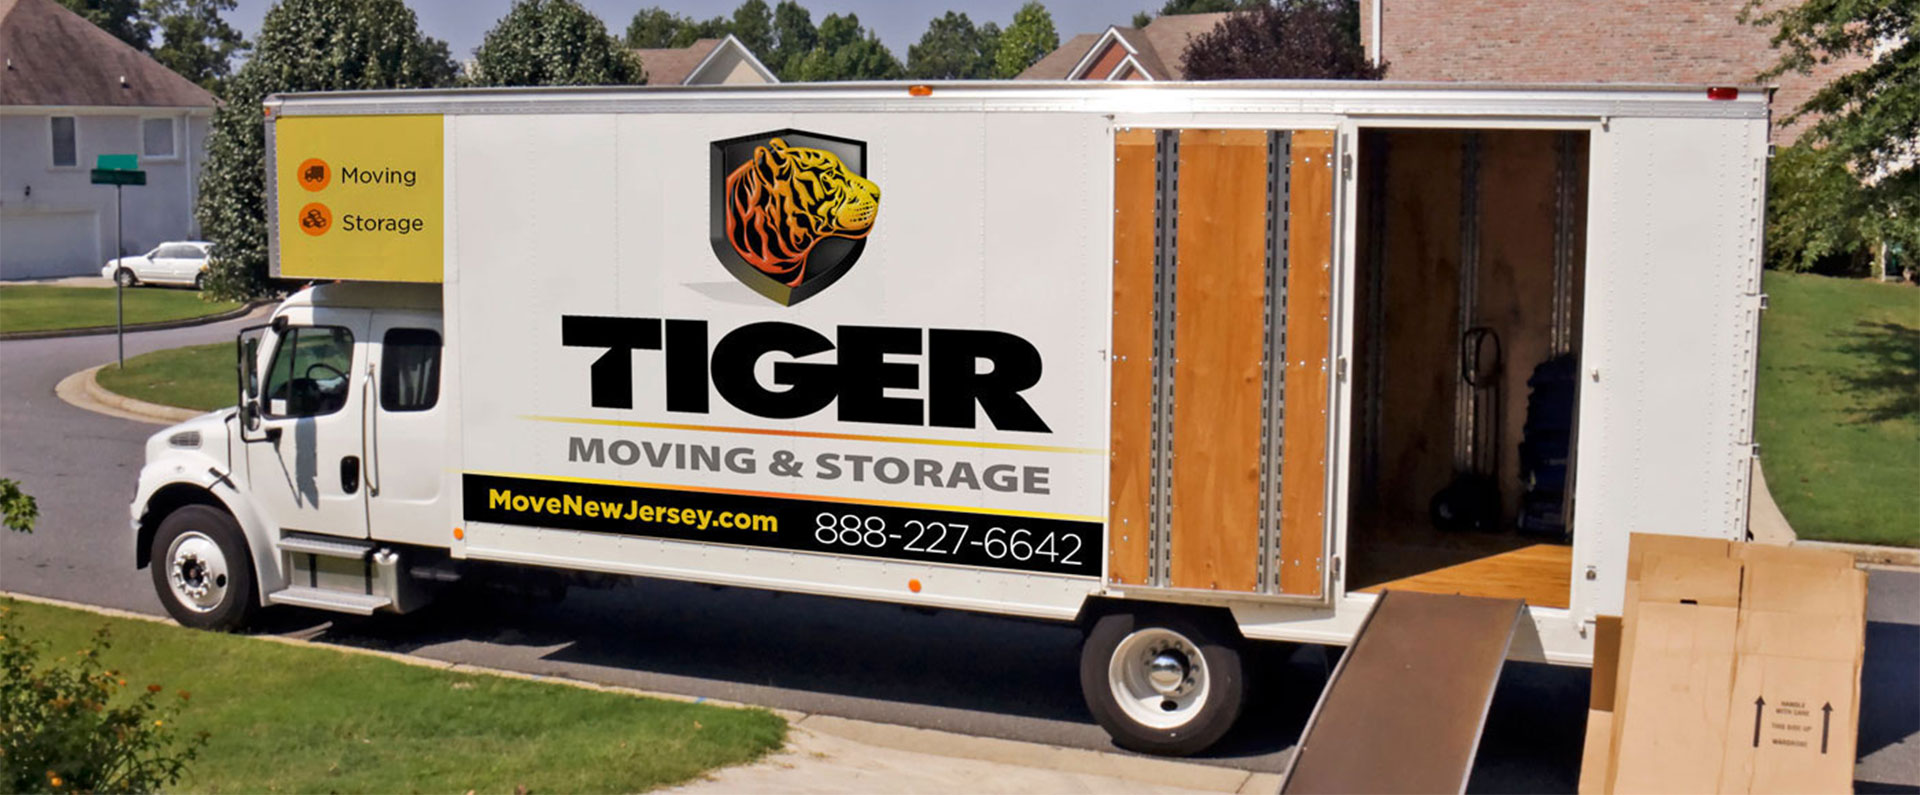 Preparing Items For Storage 10 Tips From Tiger Moving And Storage Service In Nj